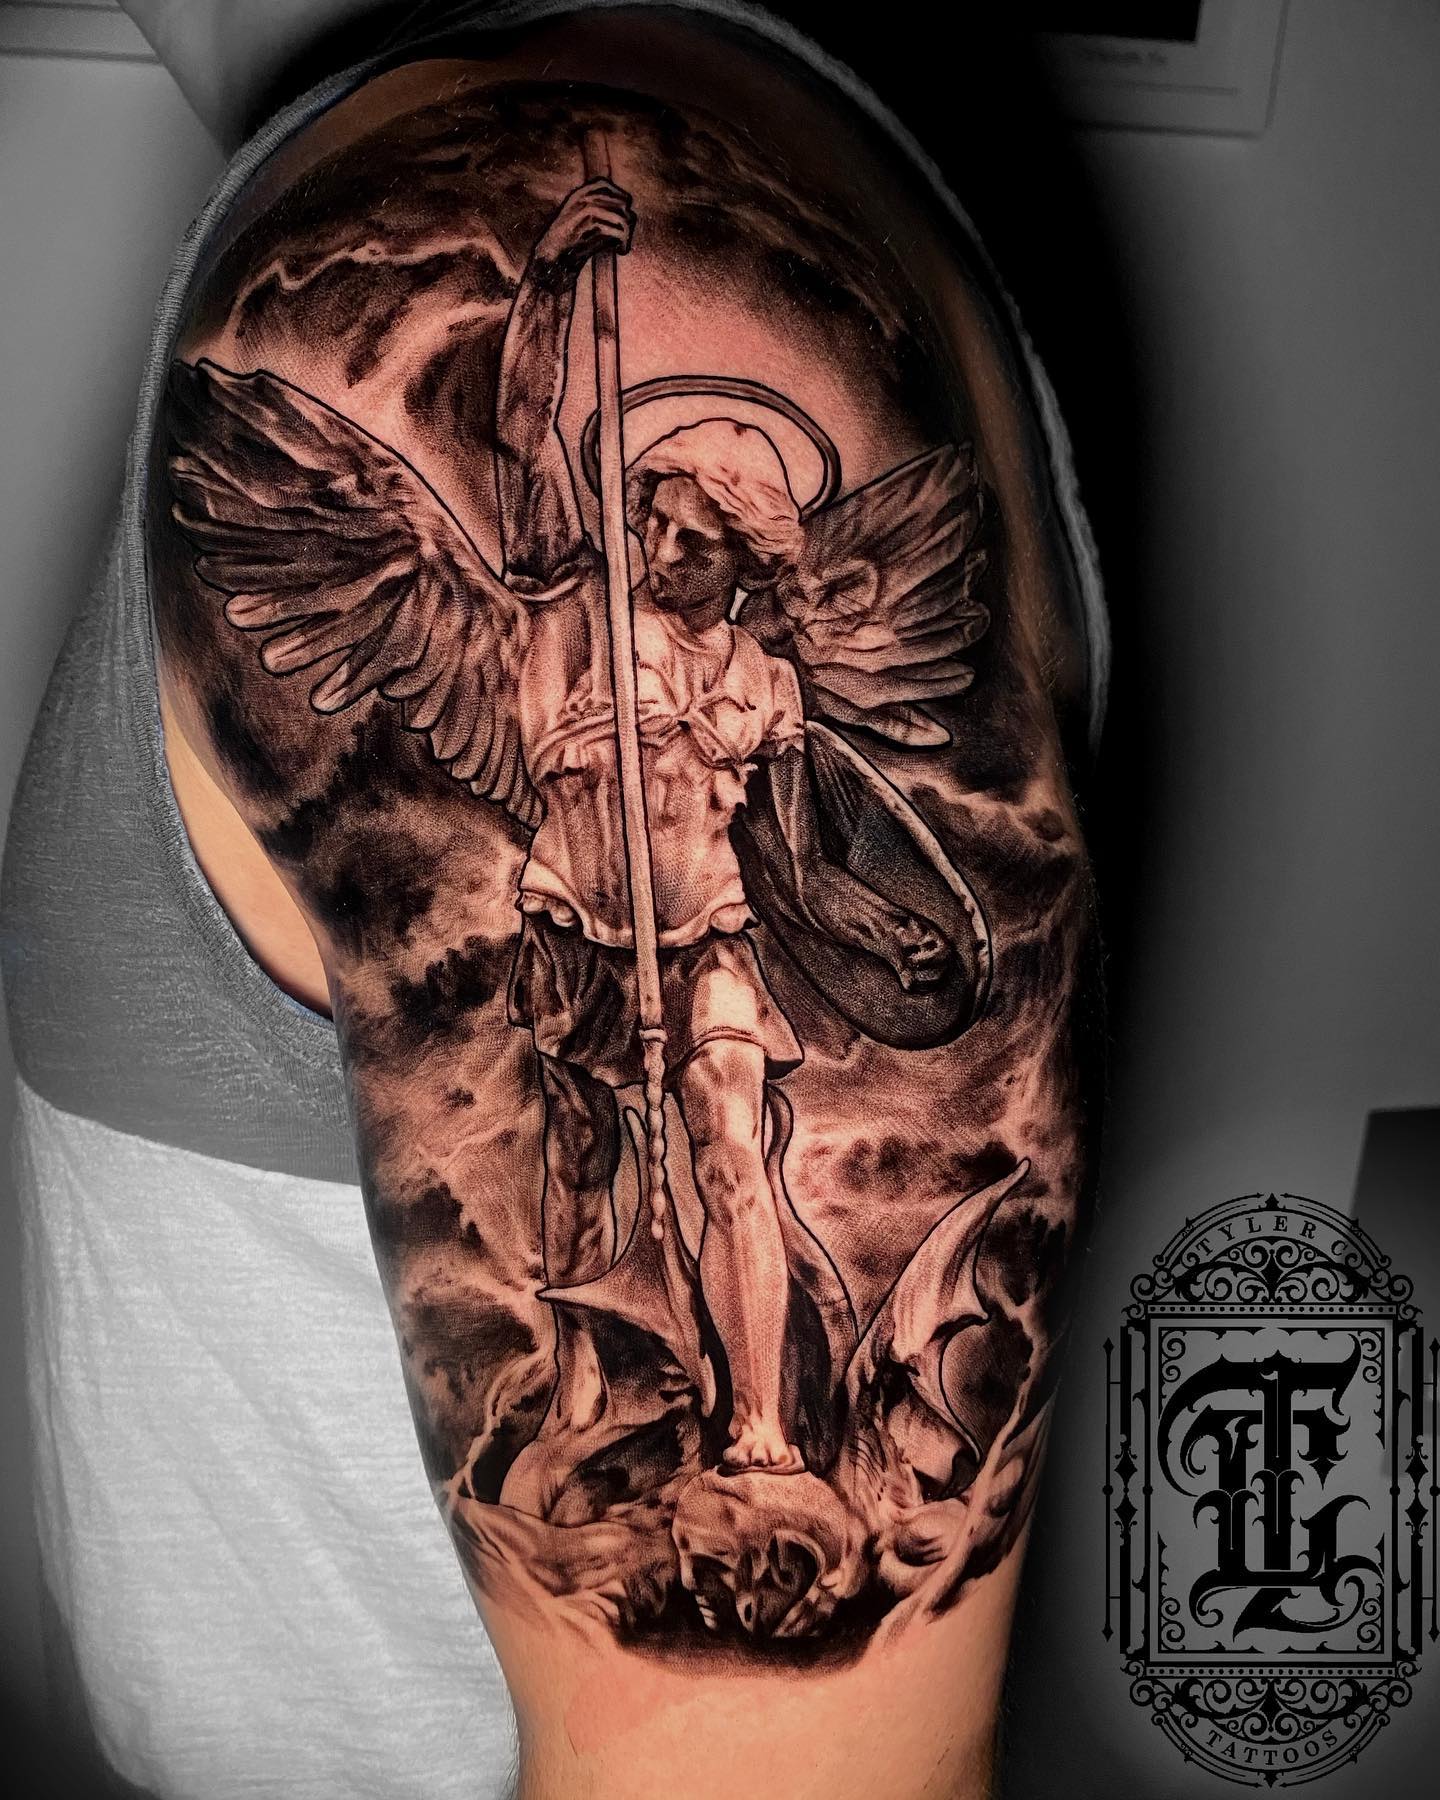 101 Best St Michael Tattoo Ideas You Have To See To Believe! Outsons